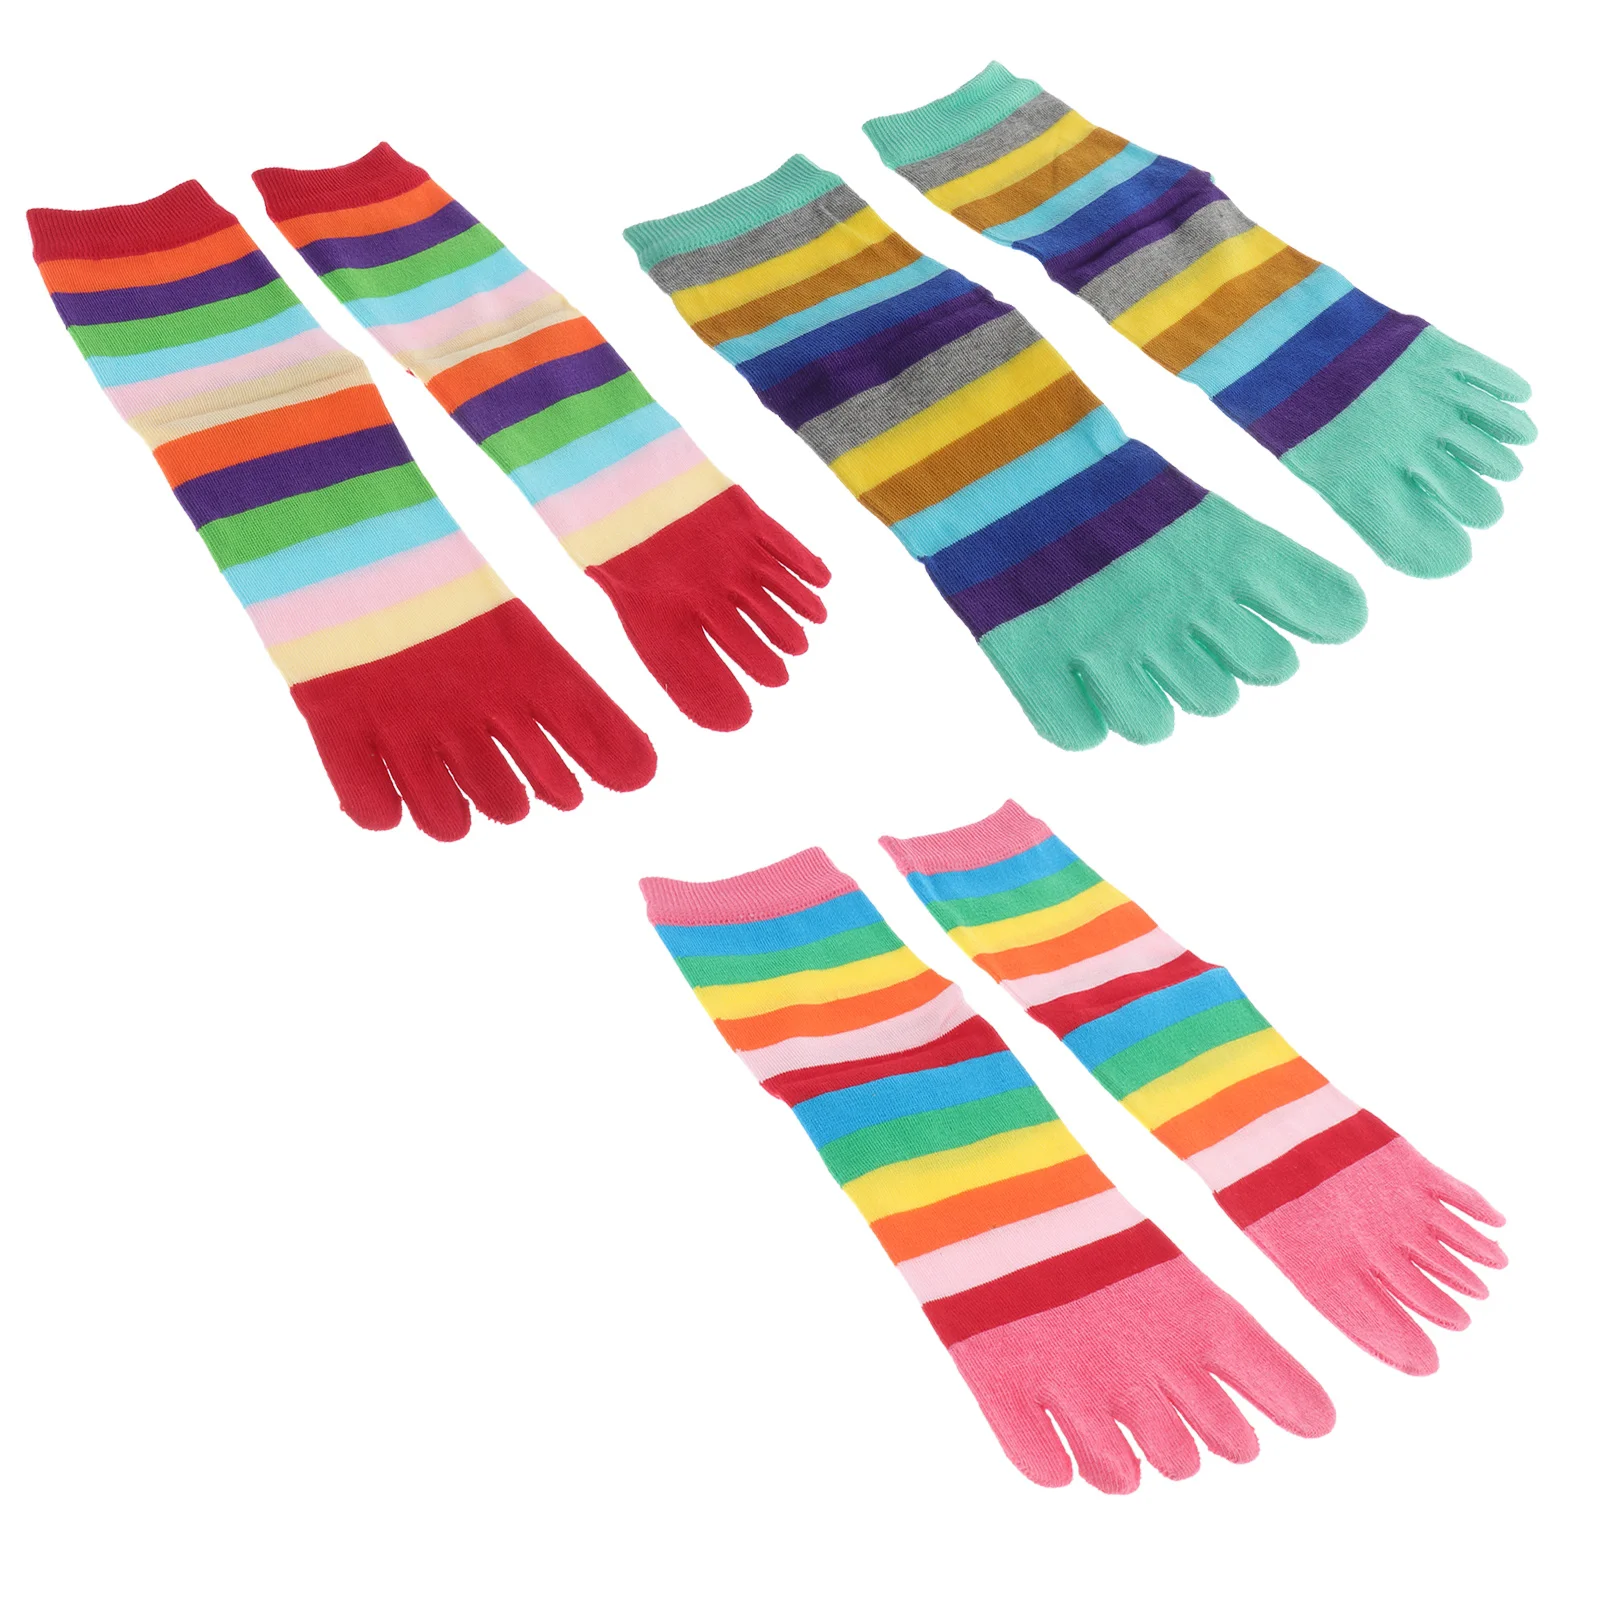 

LIOOBO 3 Pairs Five- toe Socks Colorful Strip Cotton Five Finger Socks Sweat Absorbing Breathable for